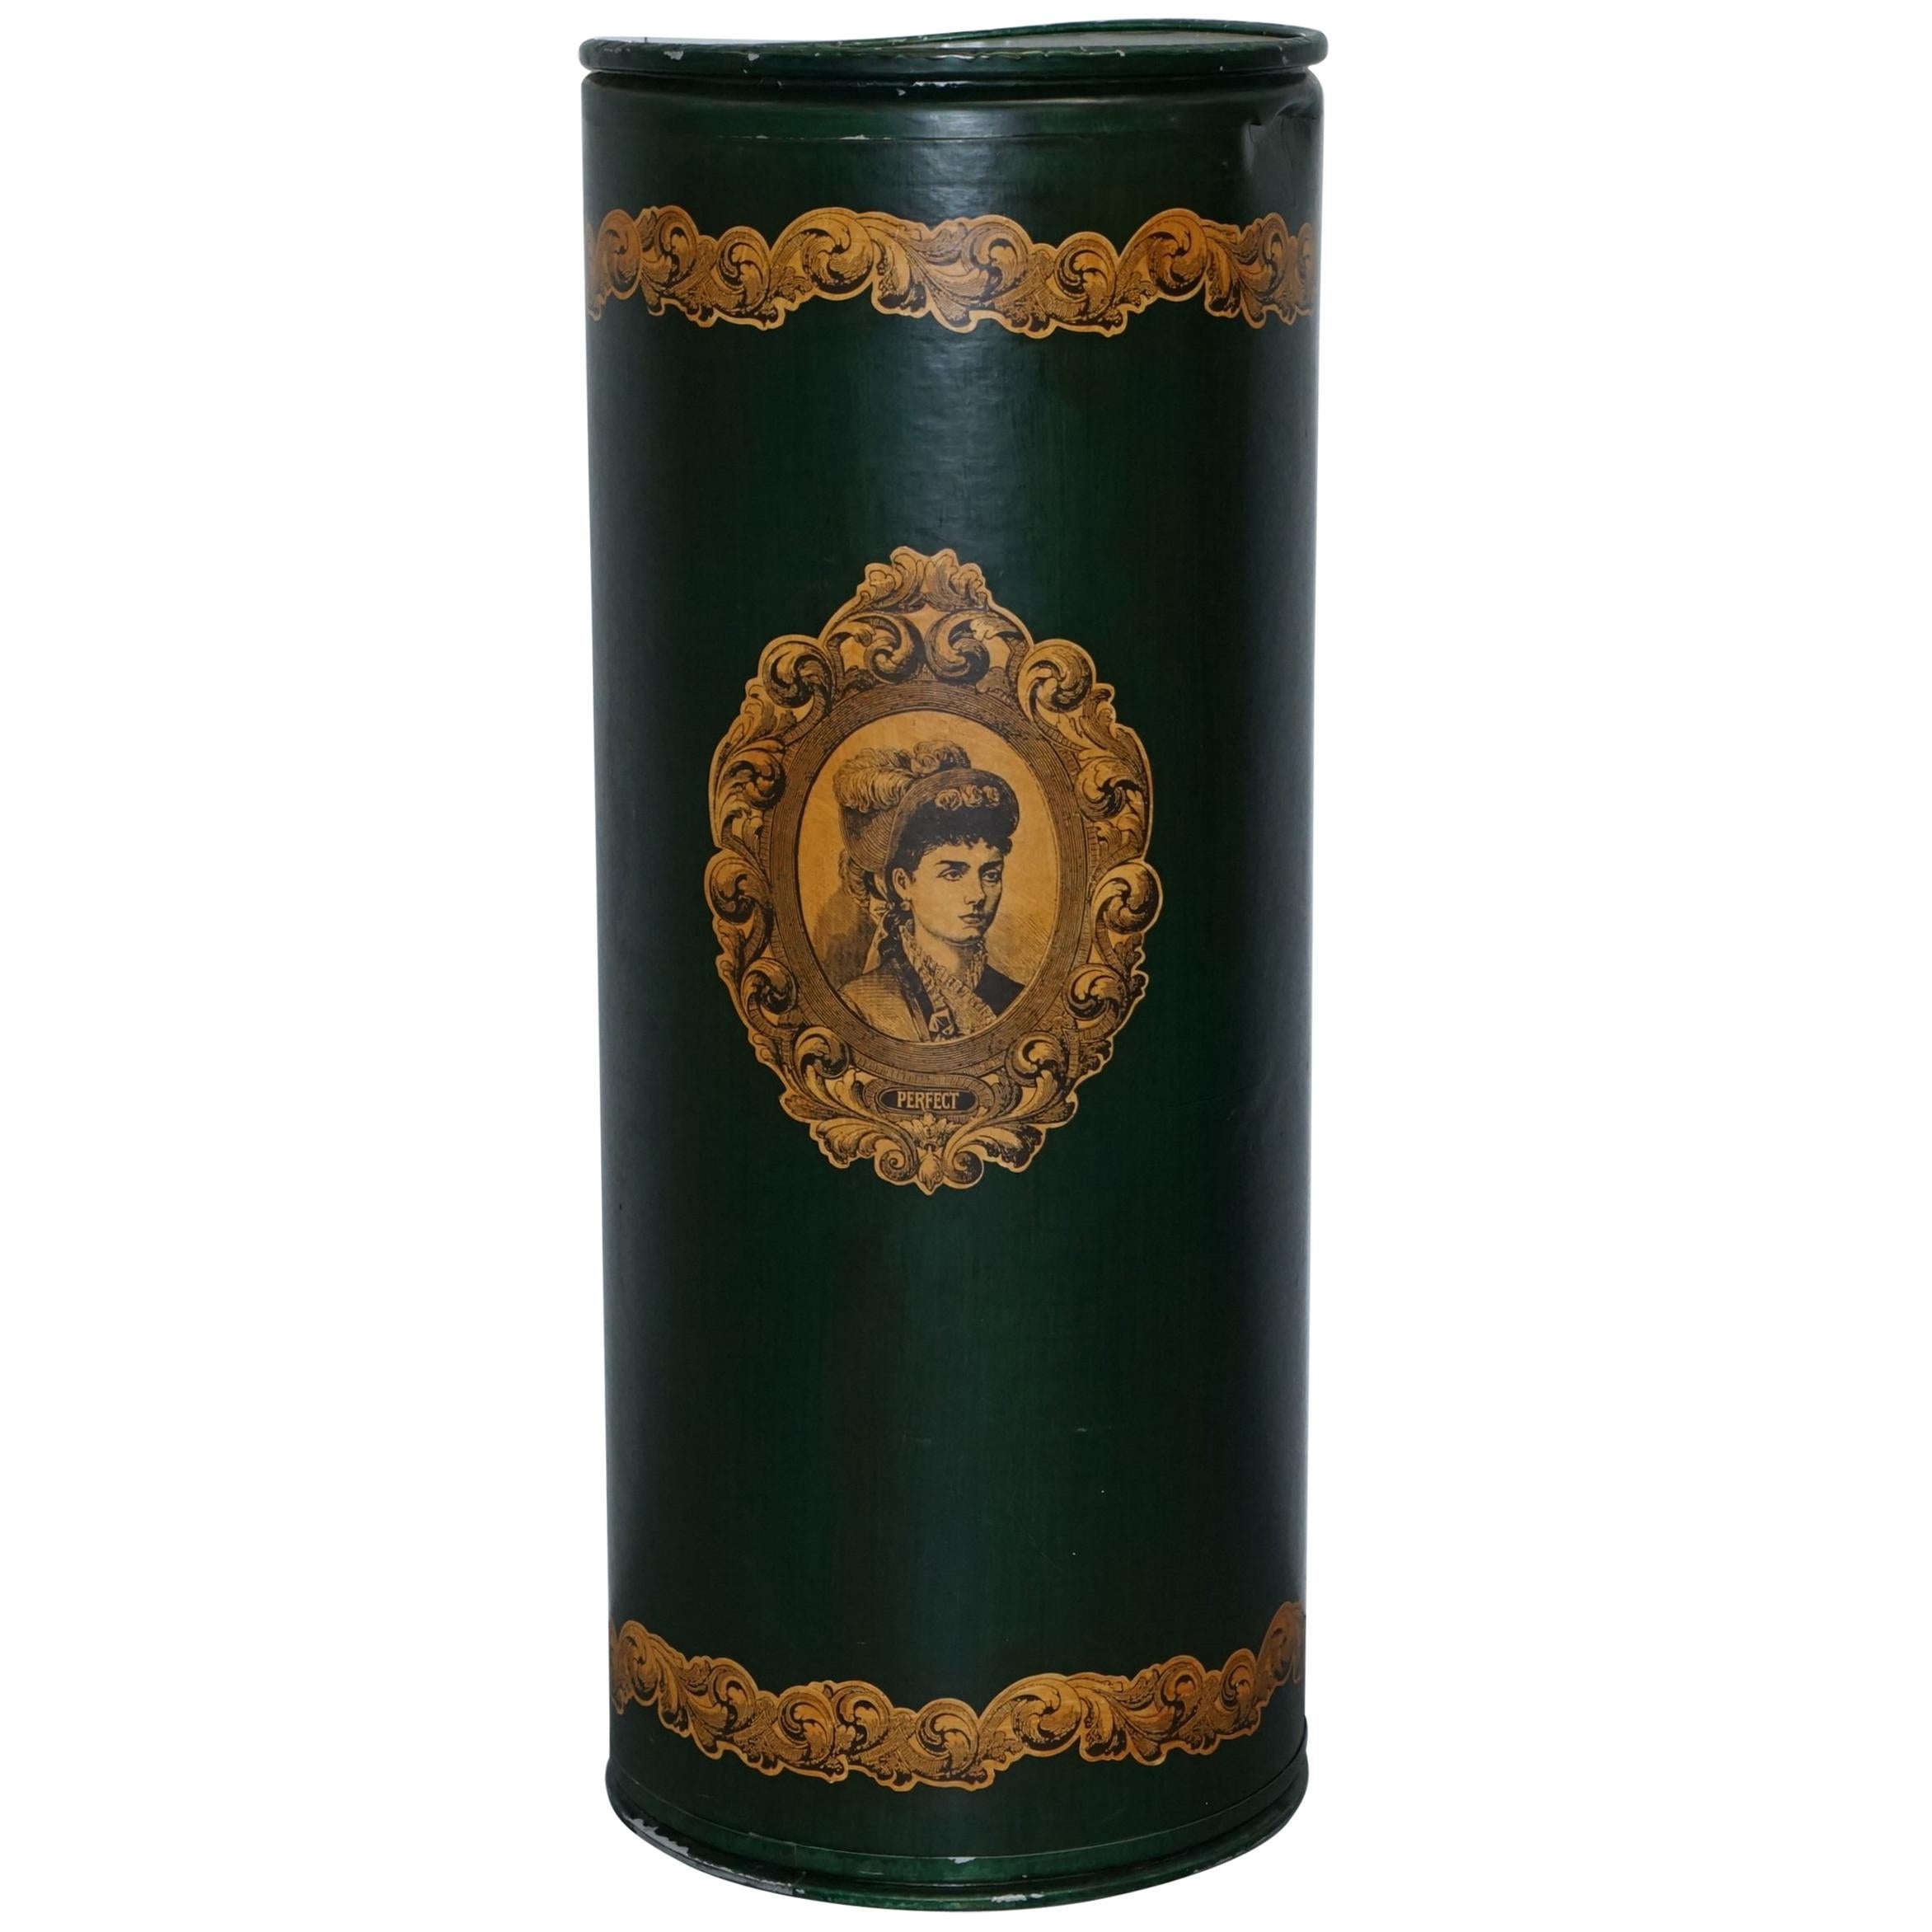 Large Irish Green Pedestal Drum Stand with Picture of a Victorian Lady on